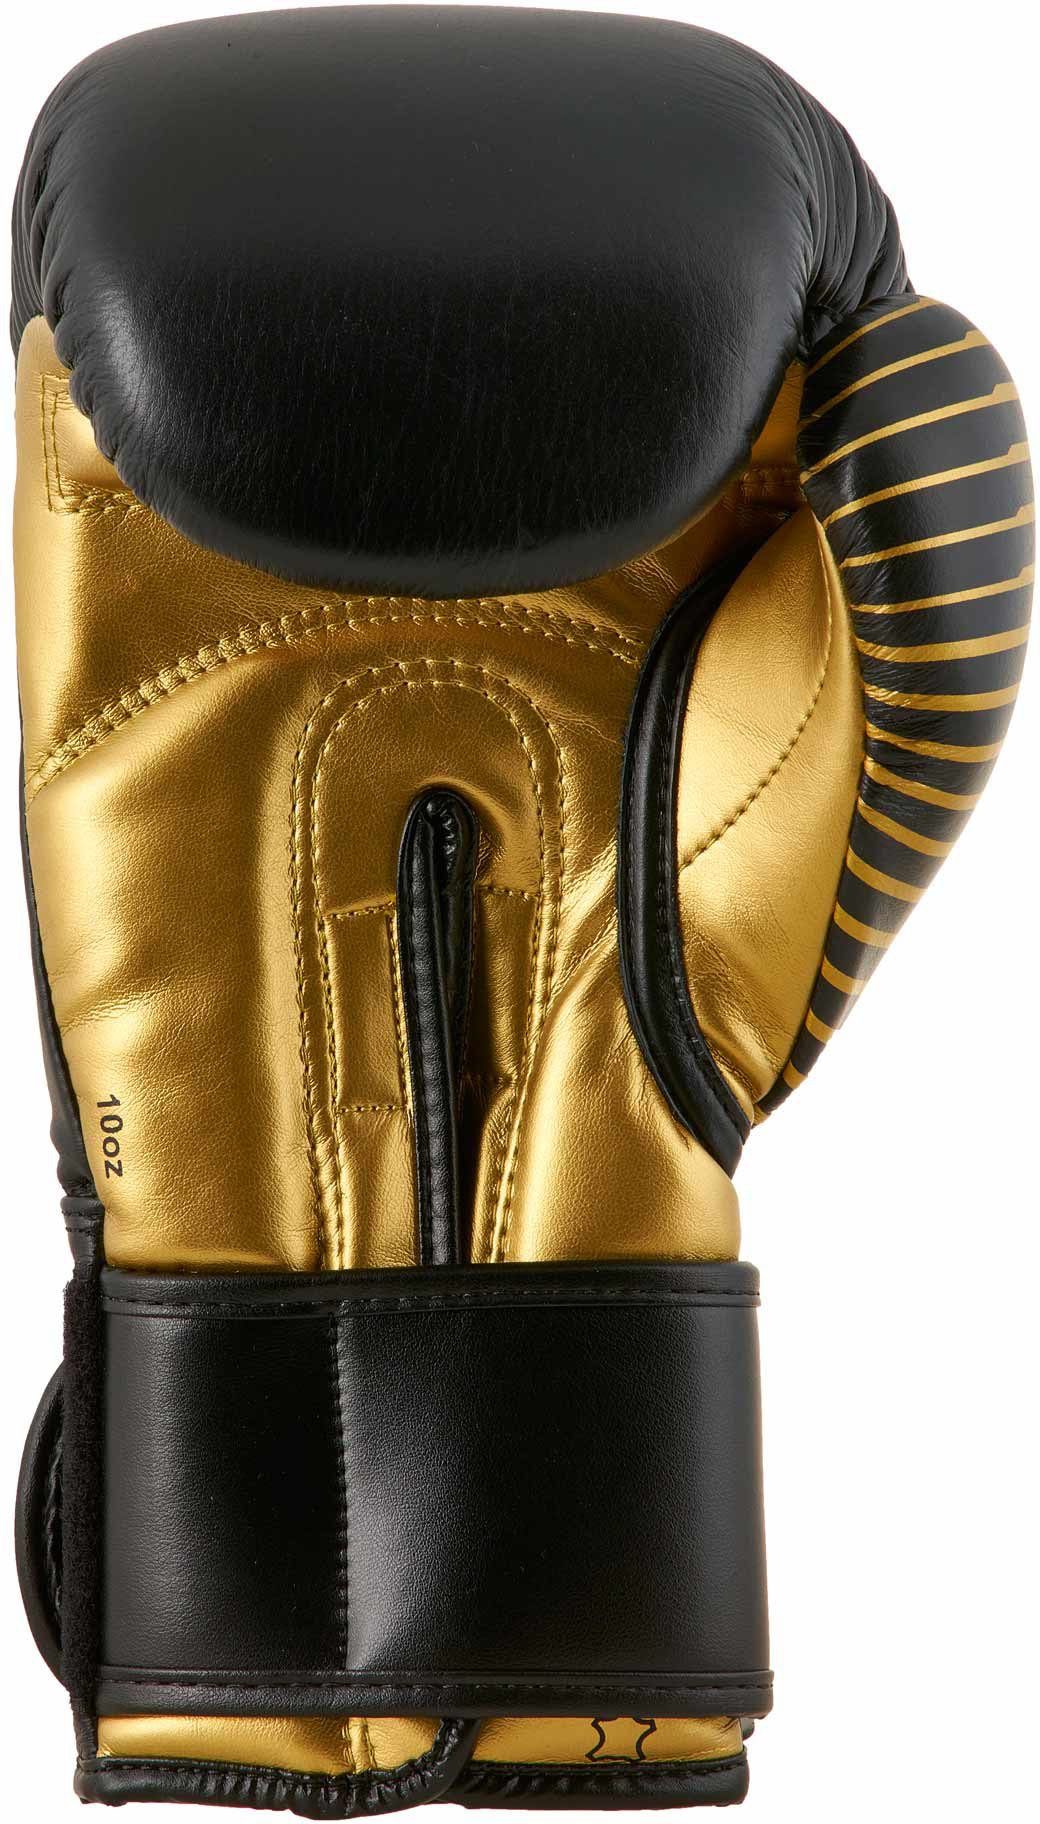 Boxhandschuhe Handschuh black/gold Performance Competition adidas